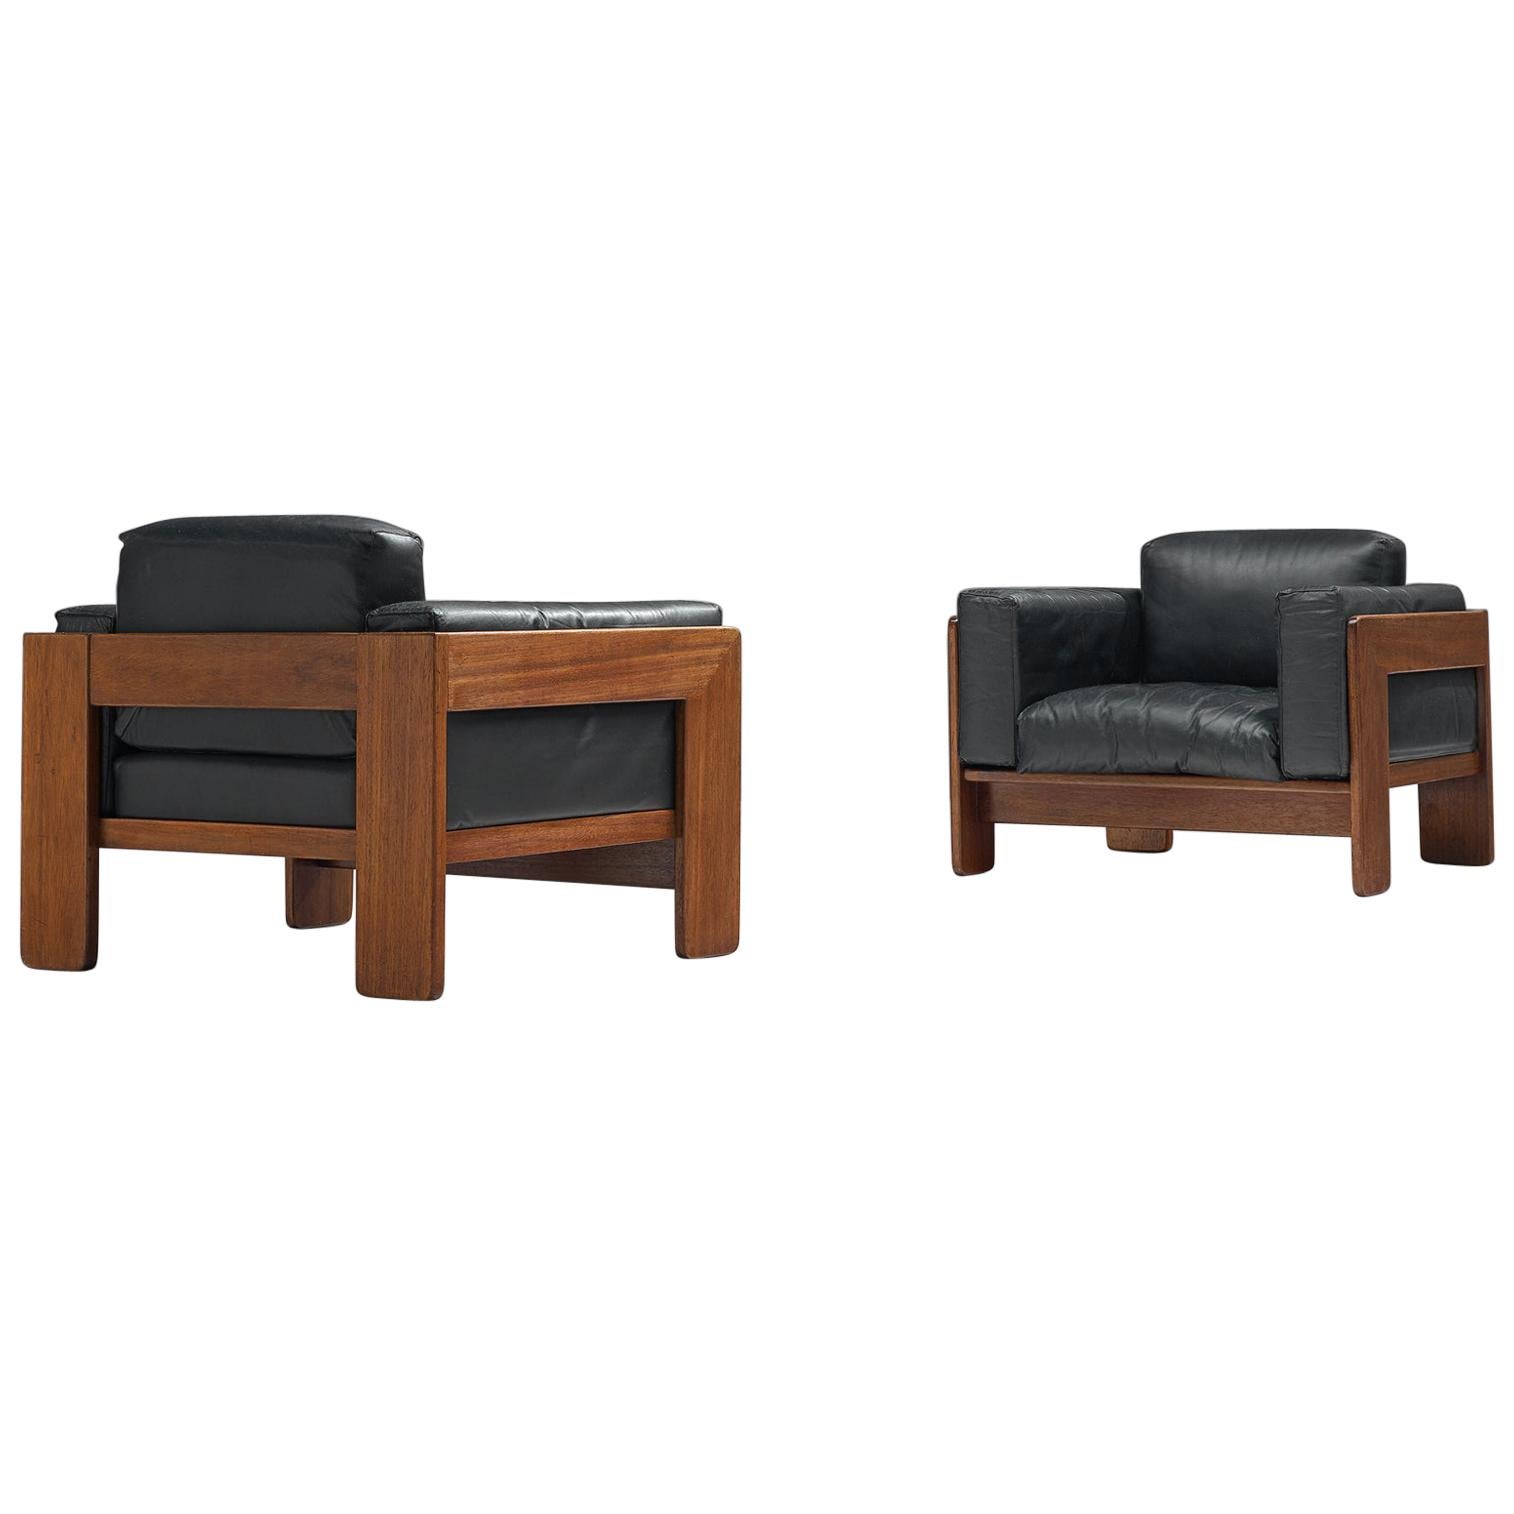 Tobia Scarpa Pair of 'Bastiano' Club Chairs in Walnut and Black Leather